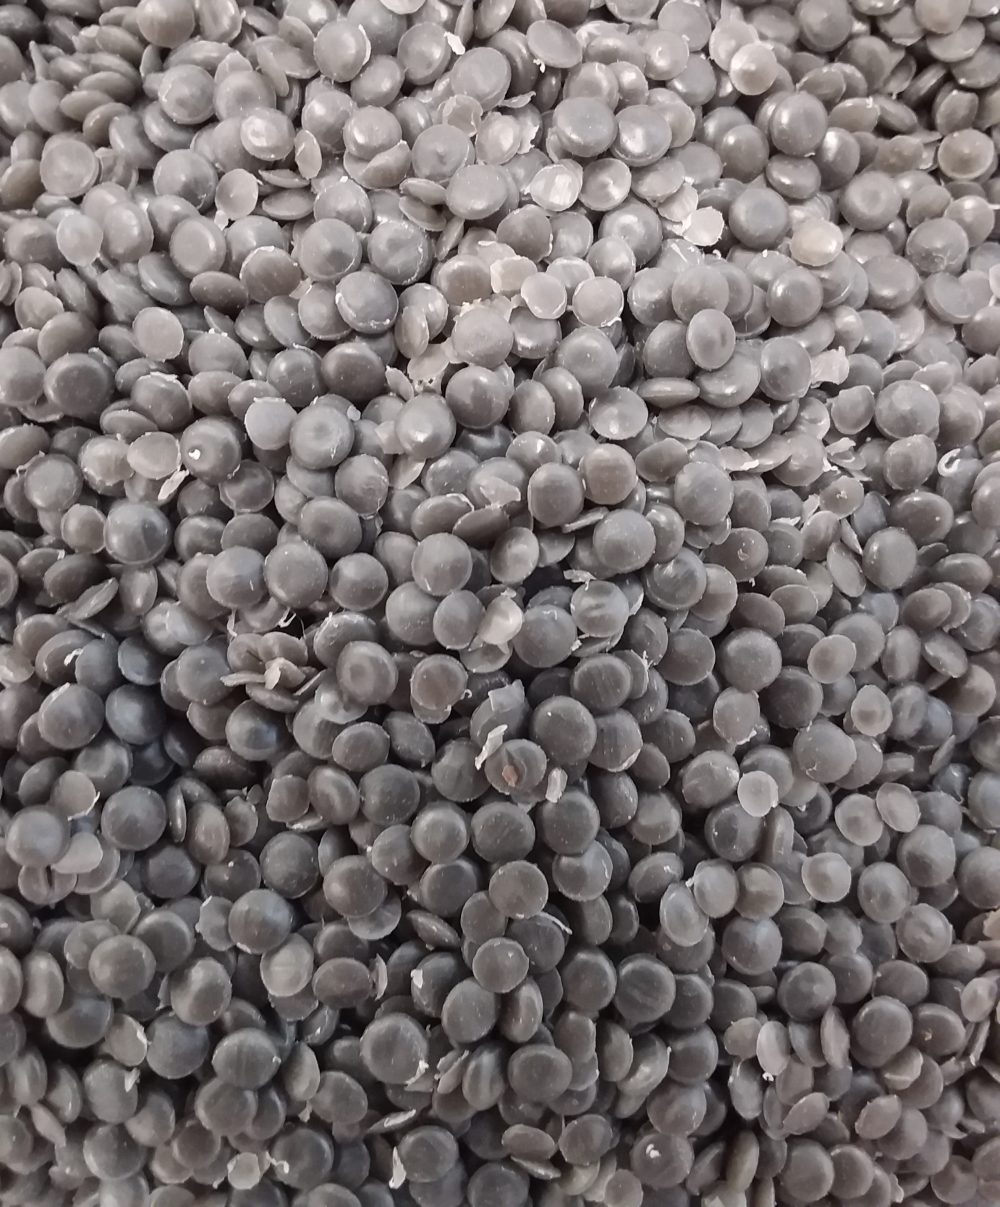 Up close image of pellets used to produce recycled mailing bags.